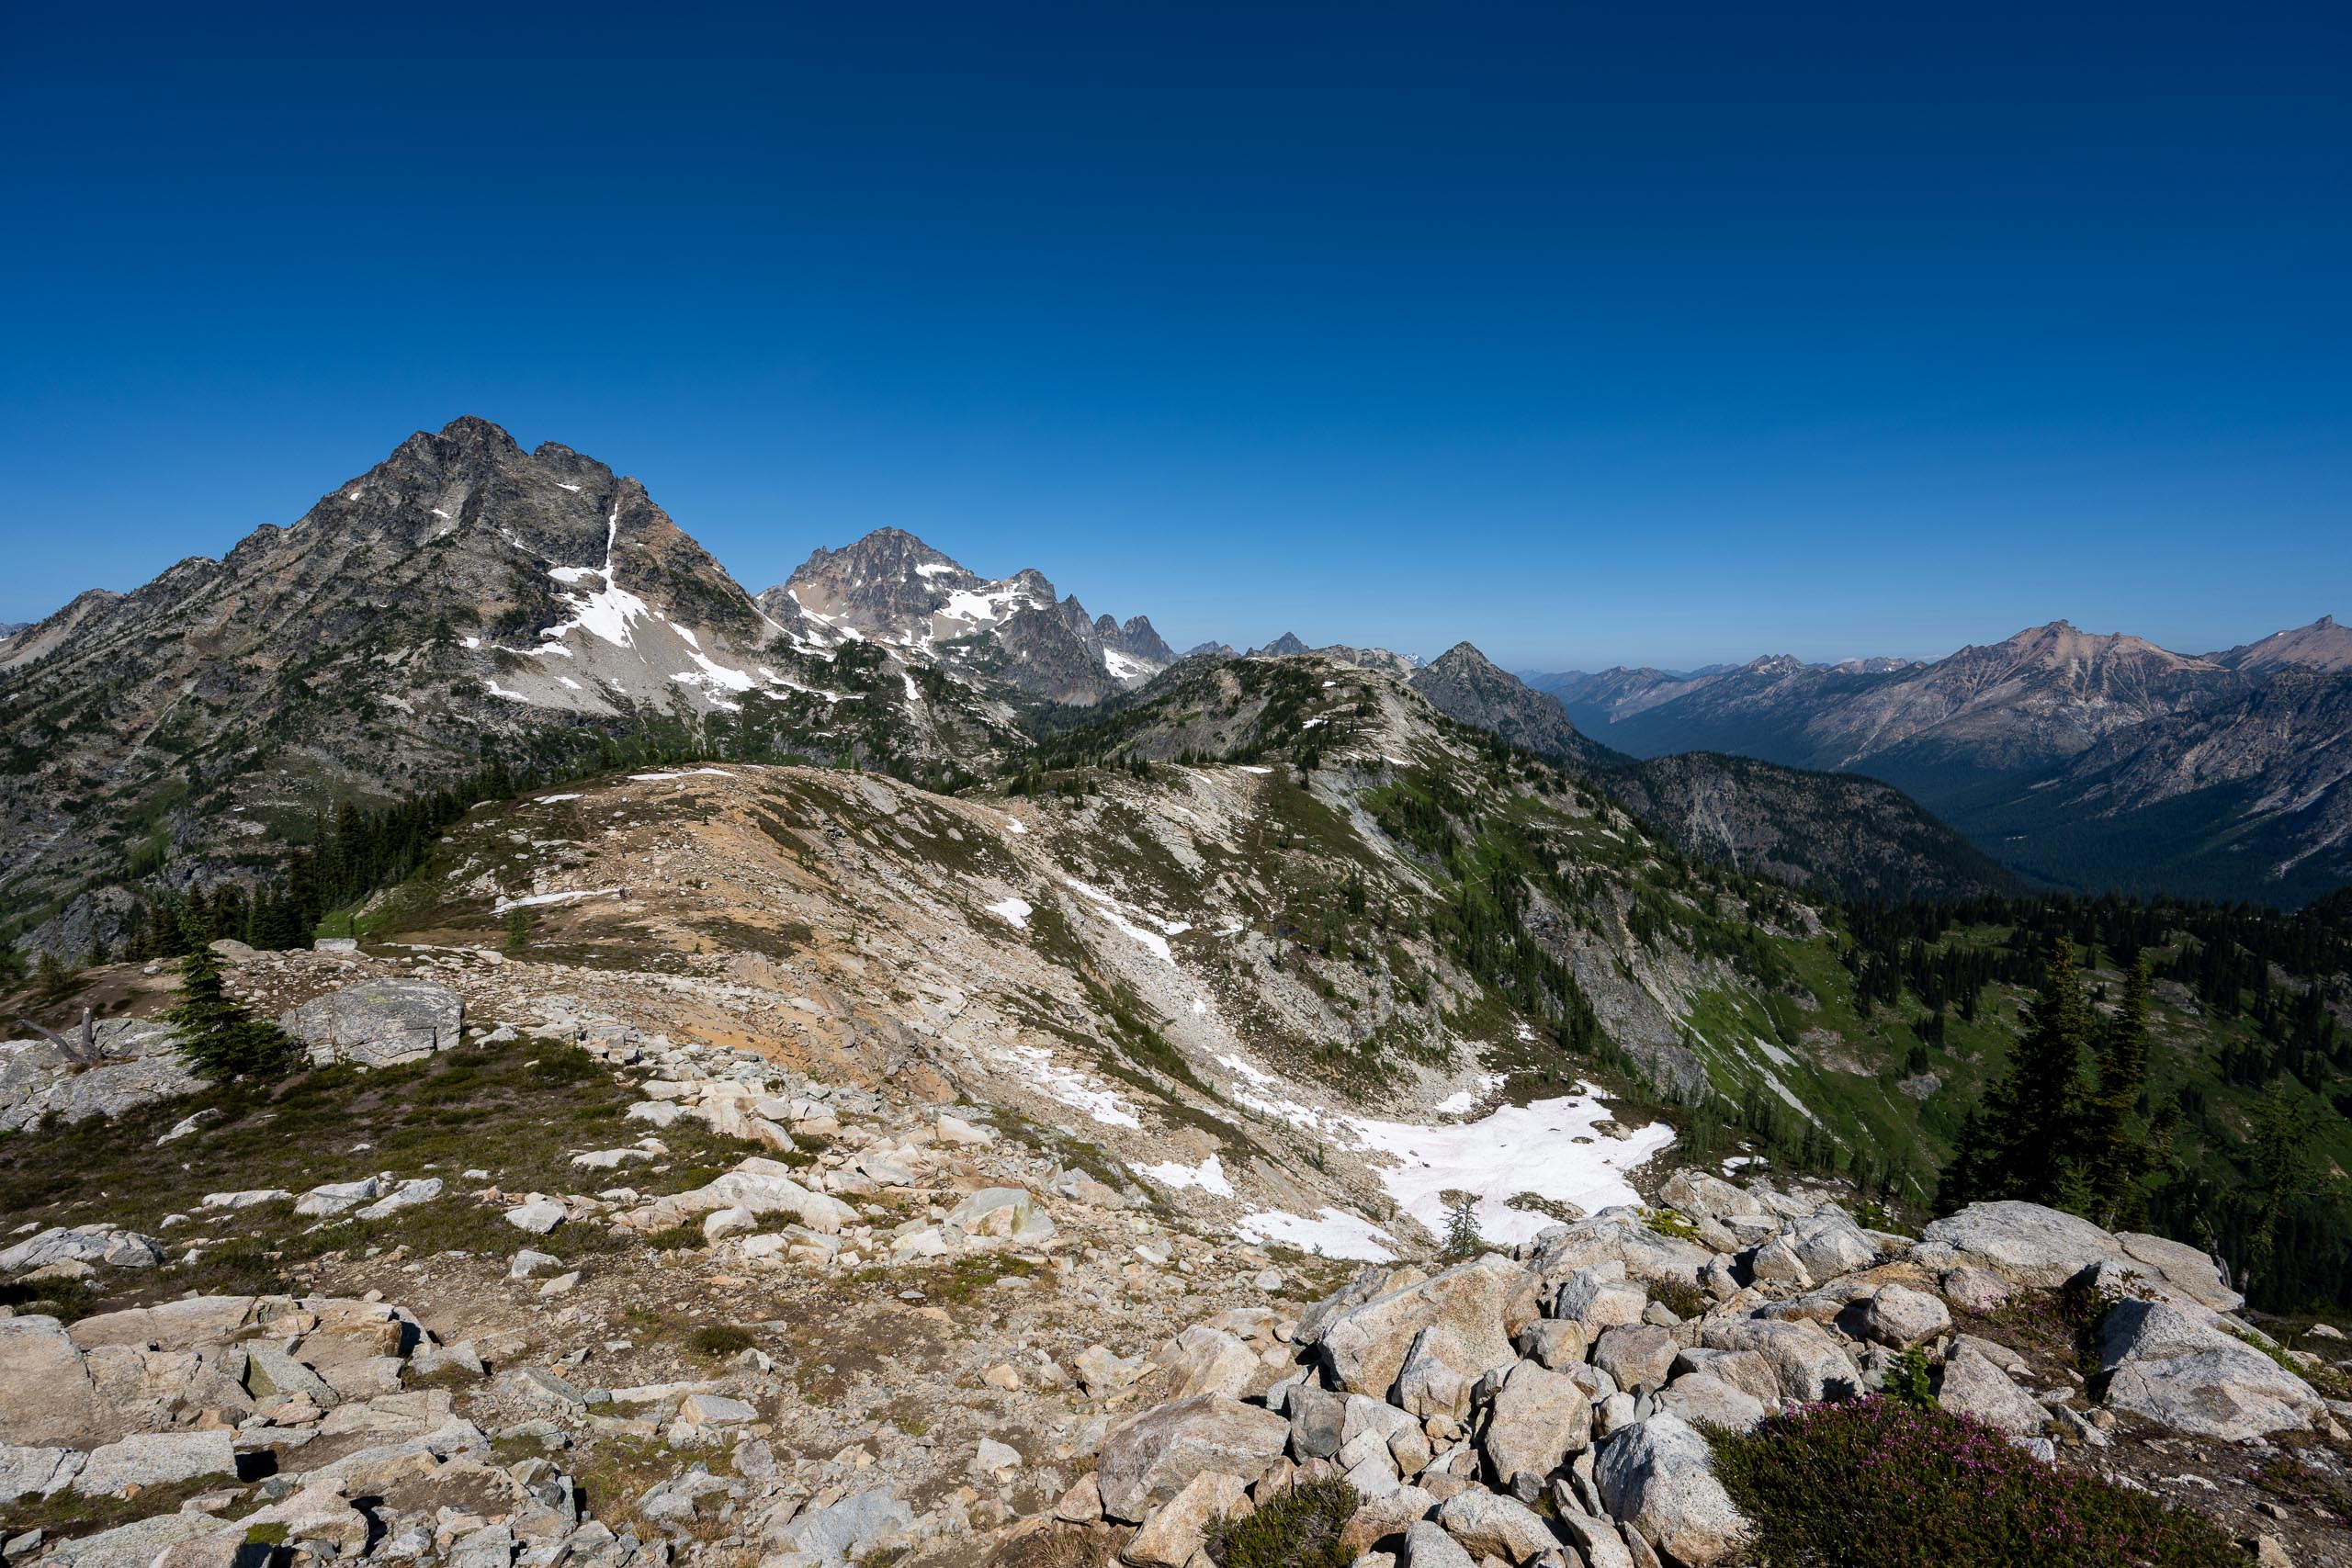 View from Maple Pass